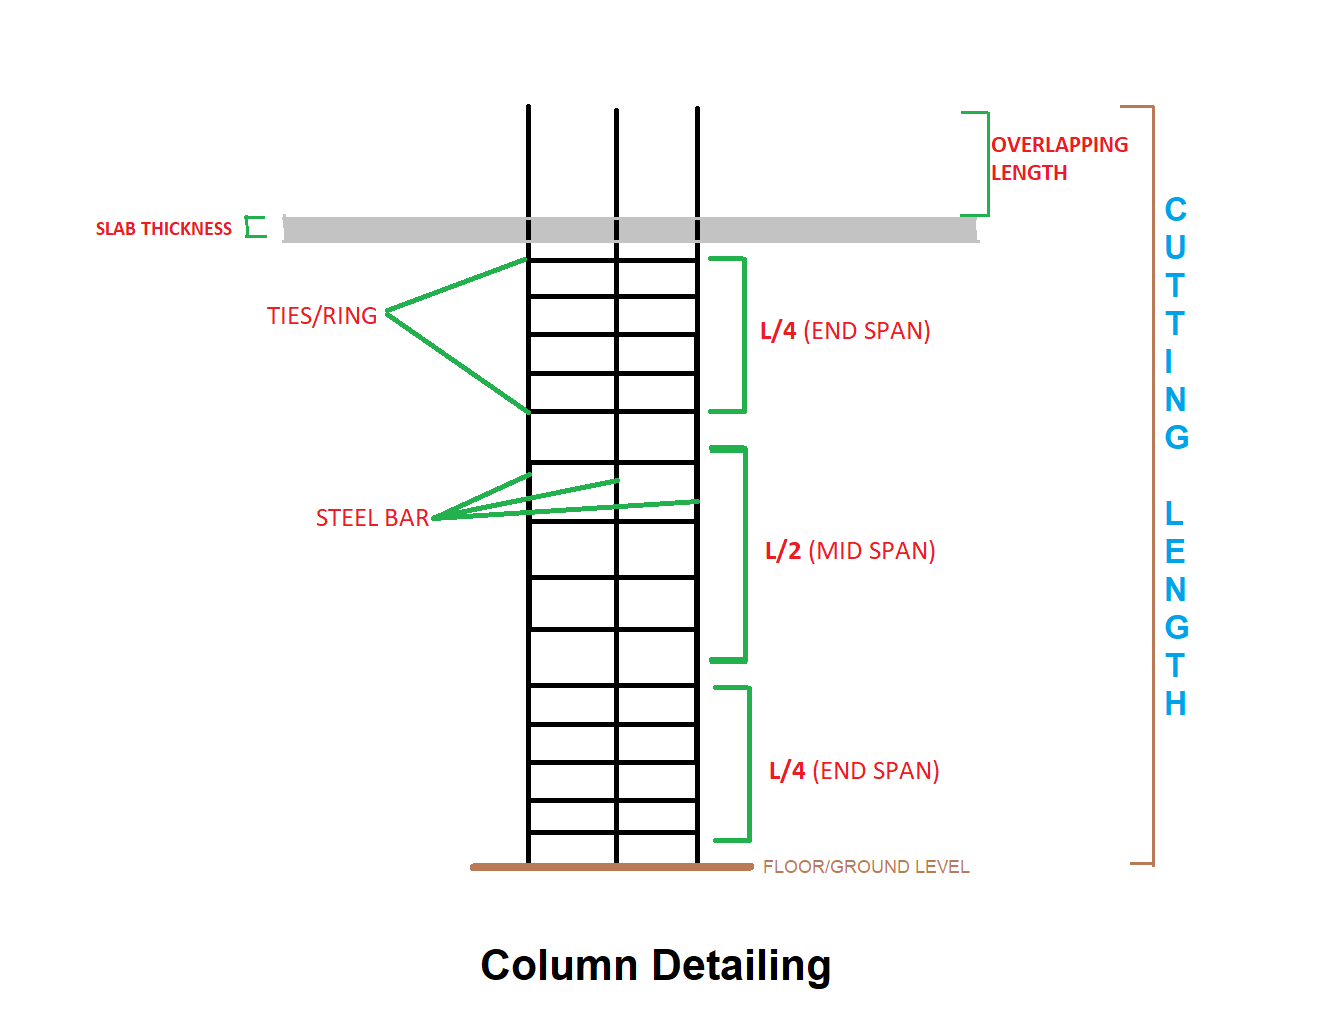 How To Calculate The Quantity Of Steel In Columns? | by Liton Biswas |  Medium